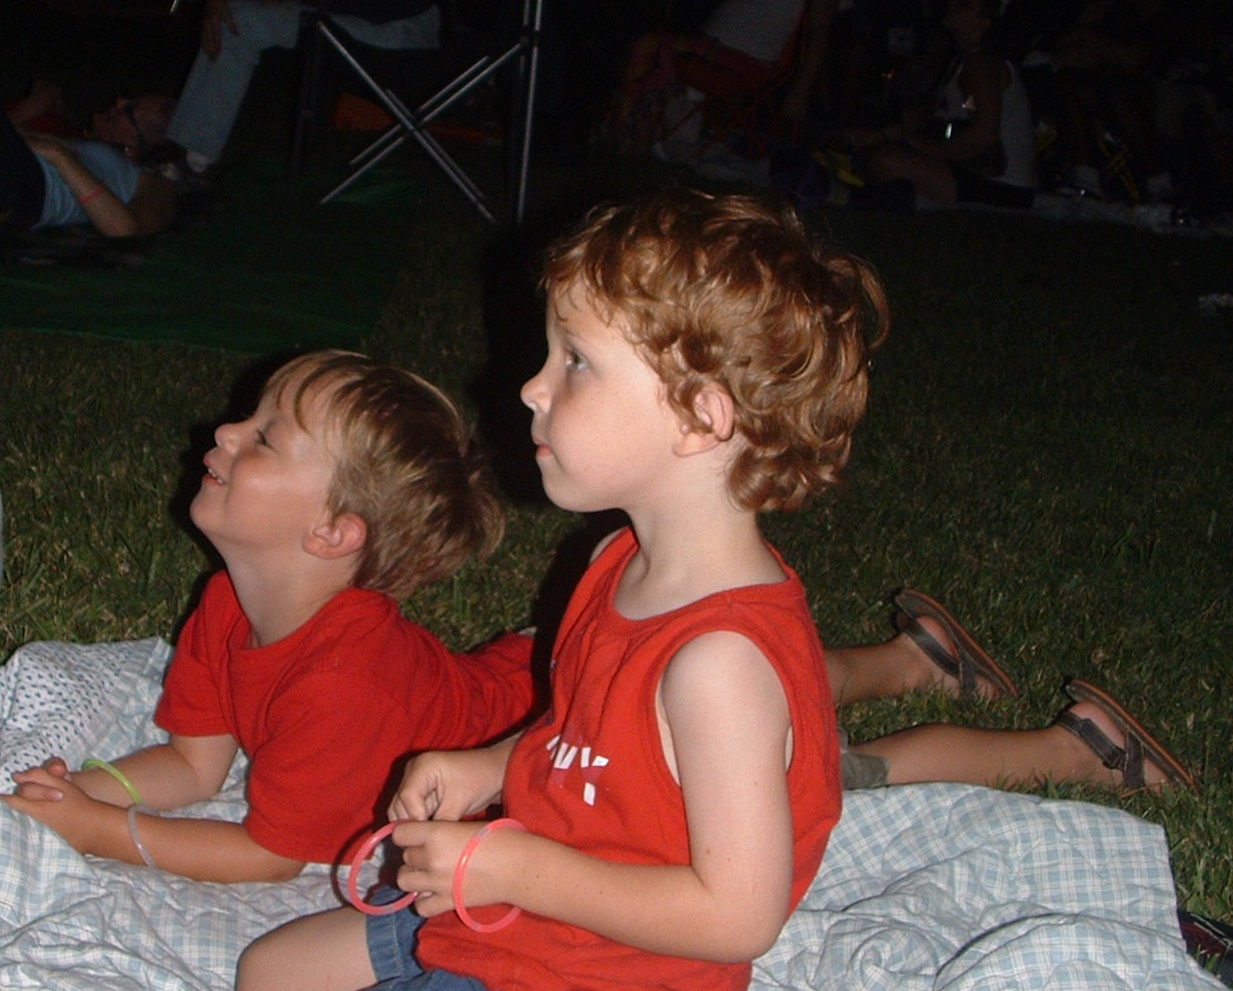 [Fourth+of+July-Noah+&+Colton+watching+fireworks+on+blanket+7-4-08.jpg]